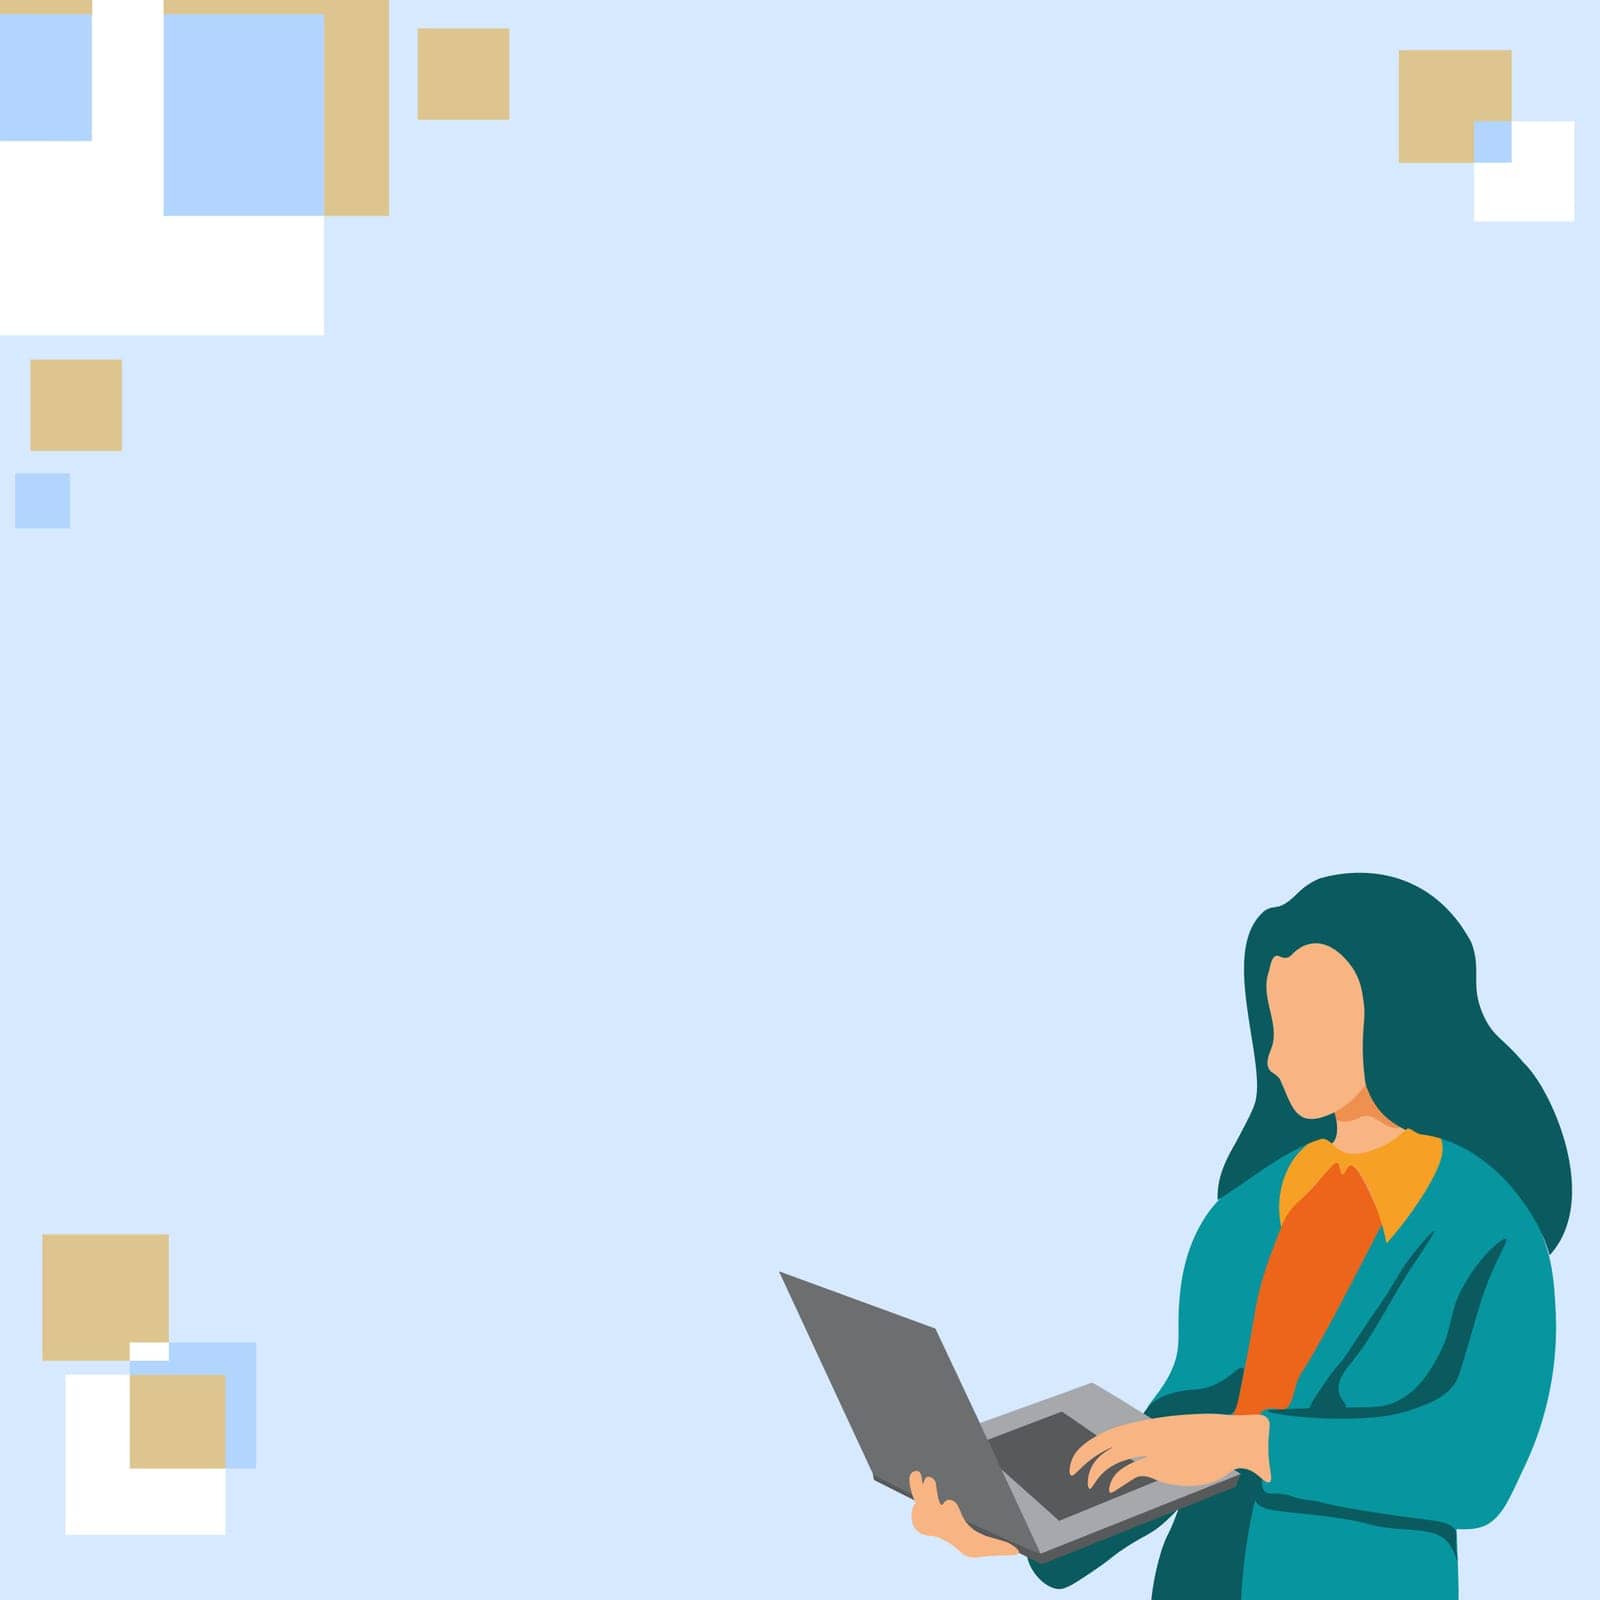 Businesswoman standing on the bright colored background. Woman holding laptop and typing text. Big white speech bubble contains important information. Presenting agenda. by nialowwa